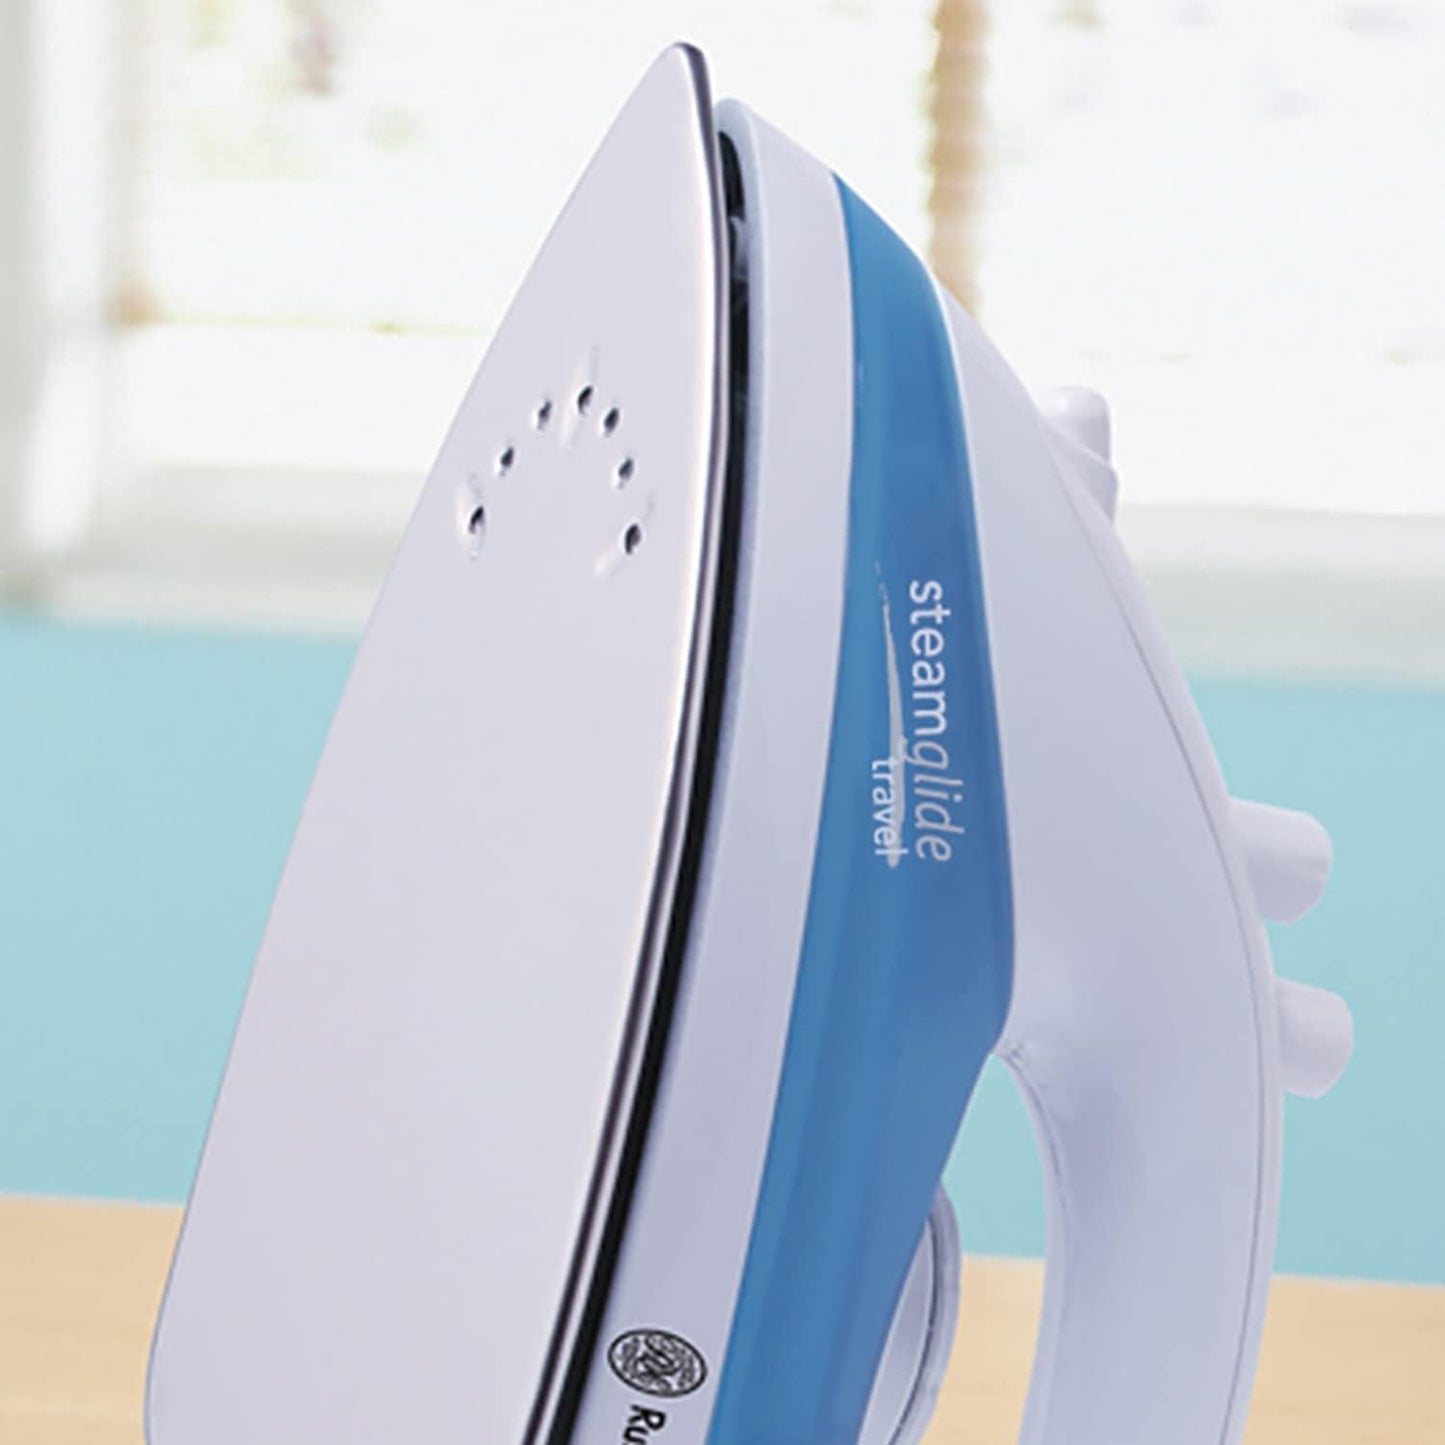 Russell Hobbs SteamGlide Dual Voltage Travel Iron